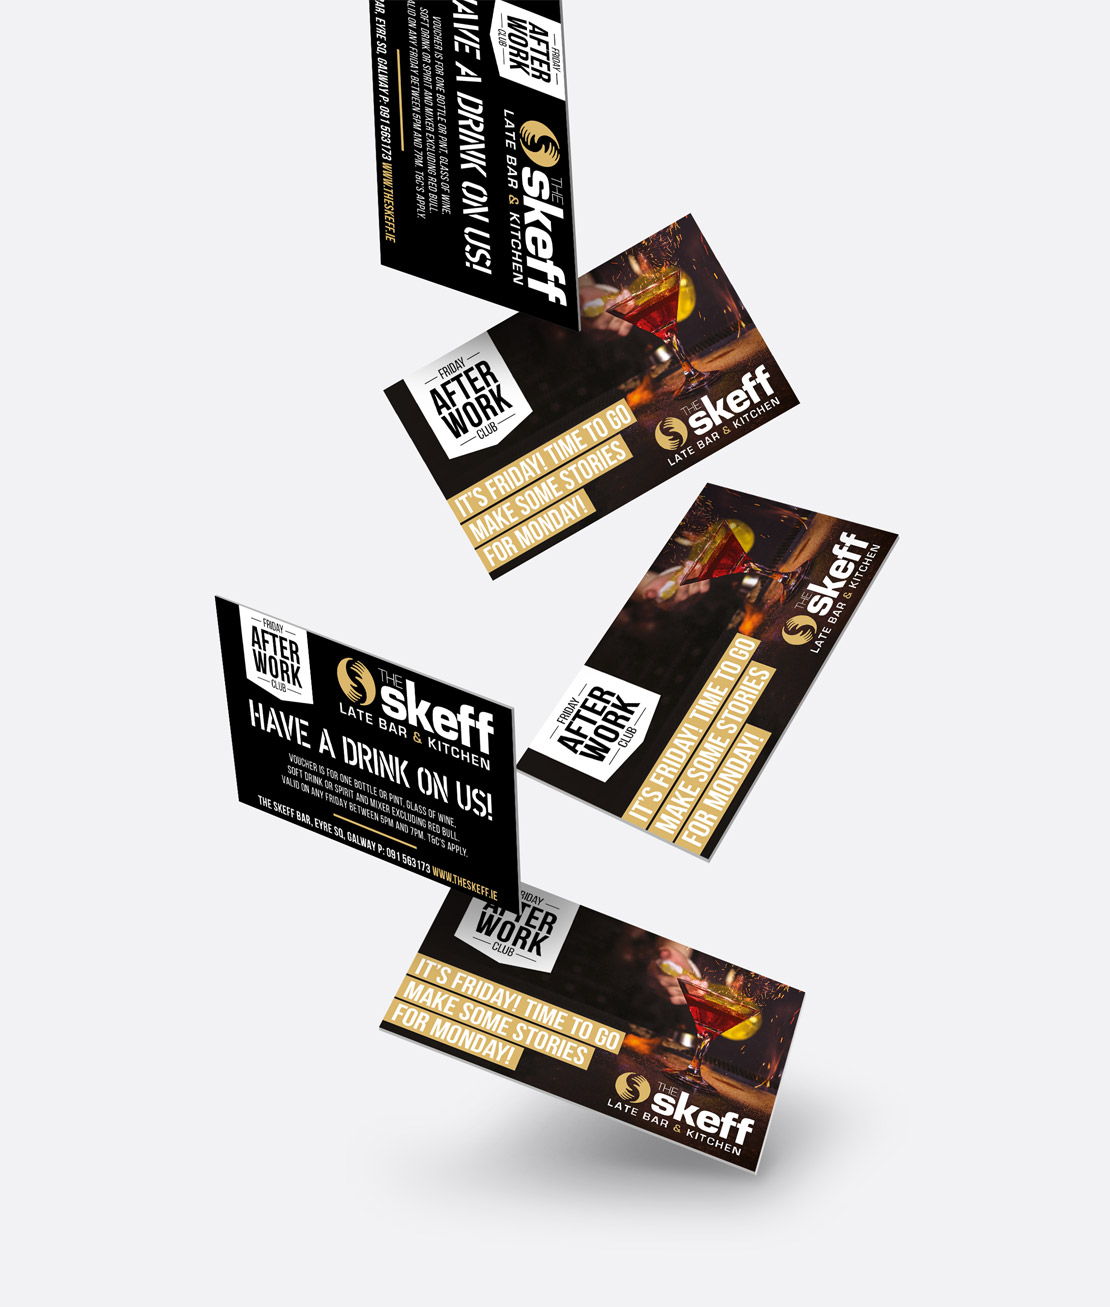 The Skeff 'Friday After Work Club' business cards